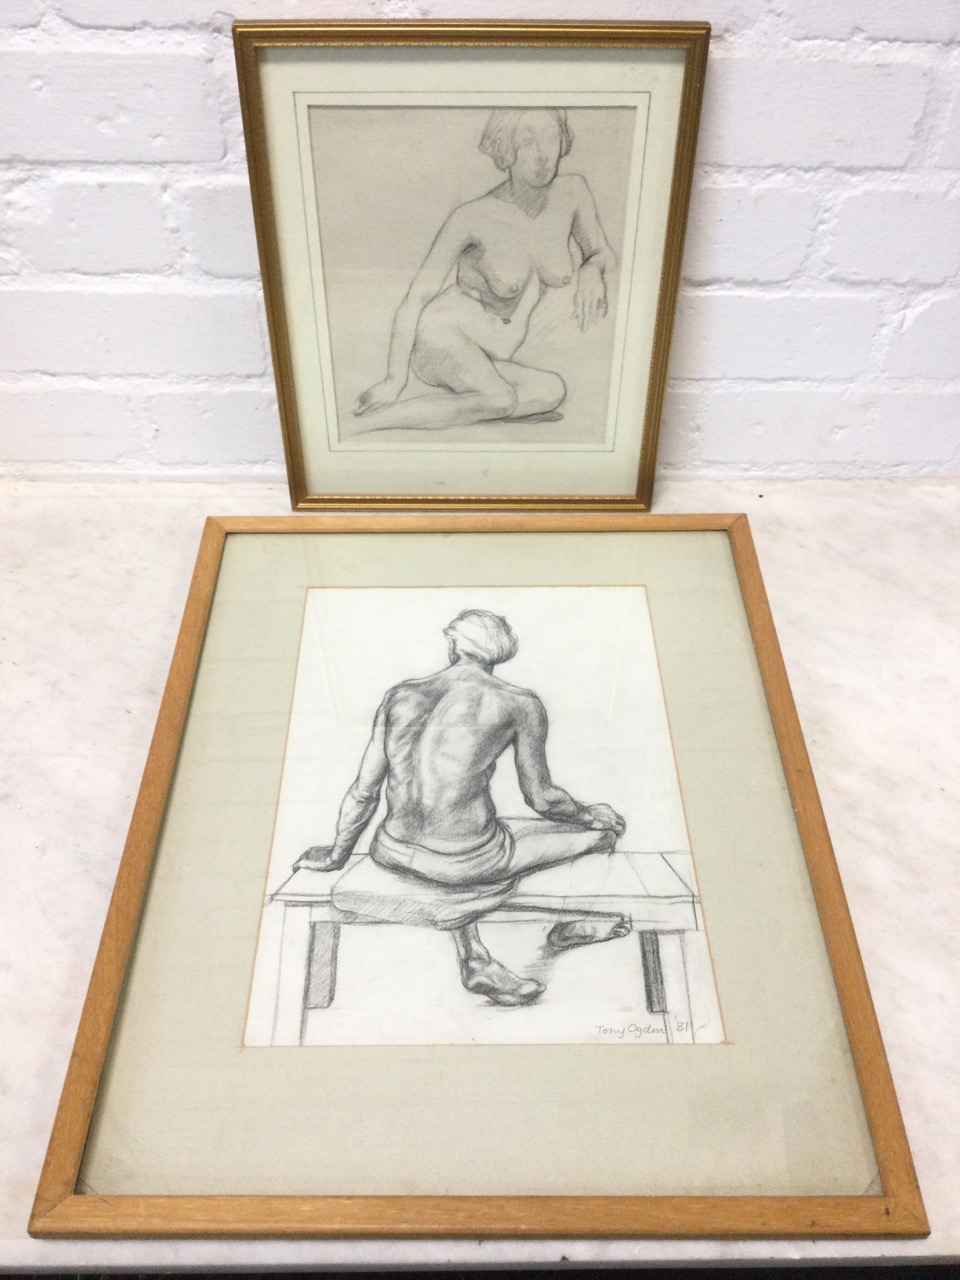 Tony Ogden, pencil study of a seated figure on bench, signed, mounted & framed; and a pencil nude